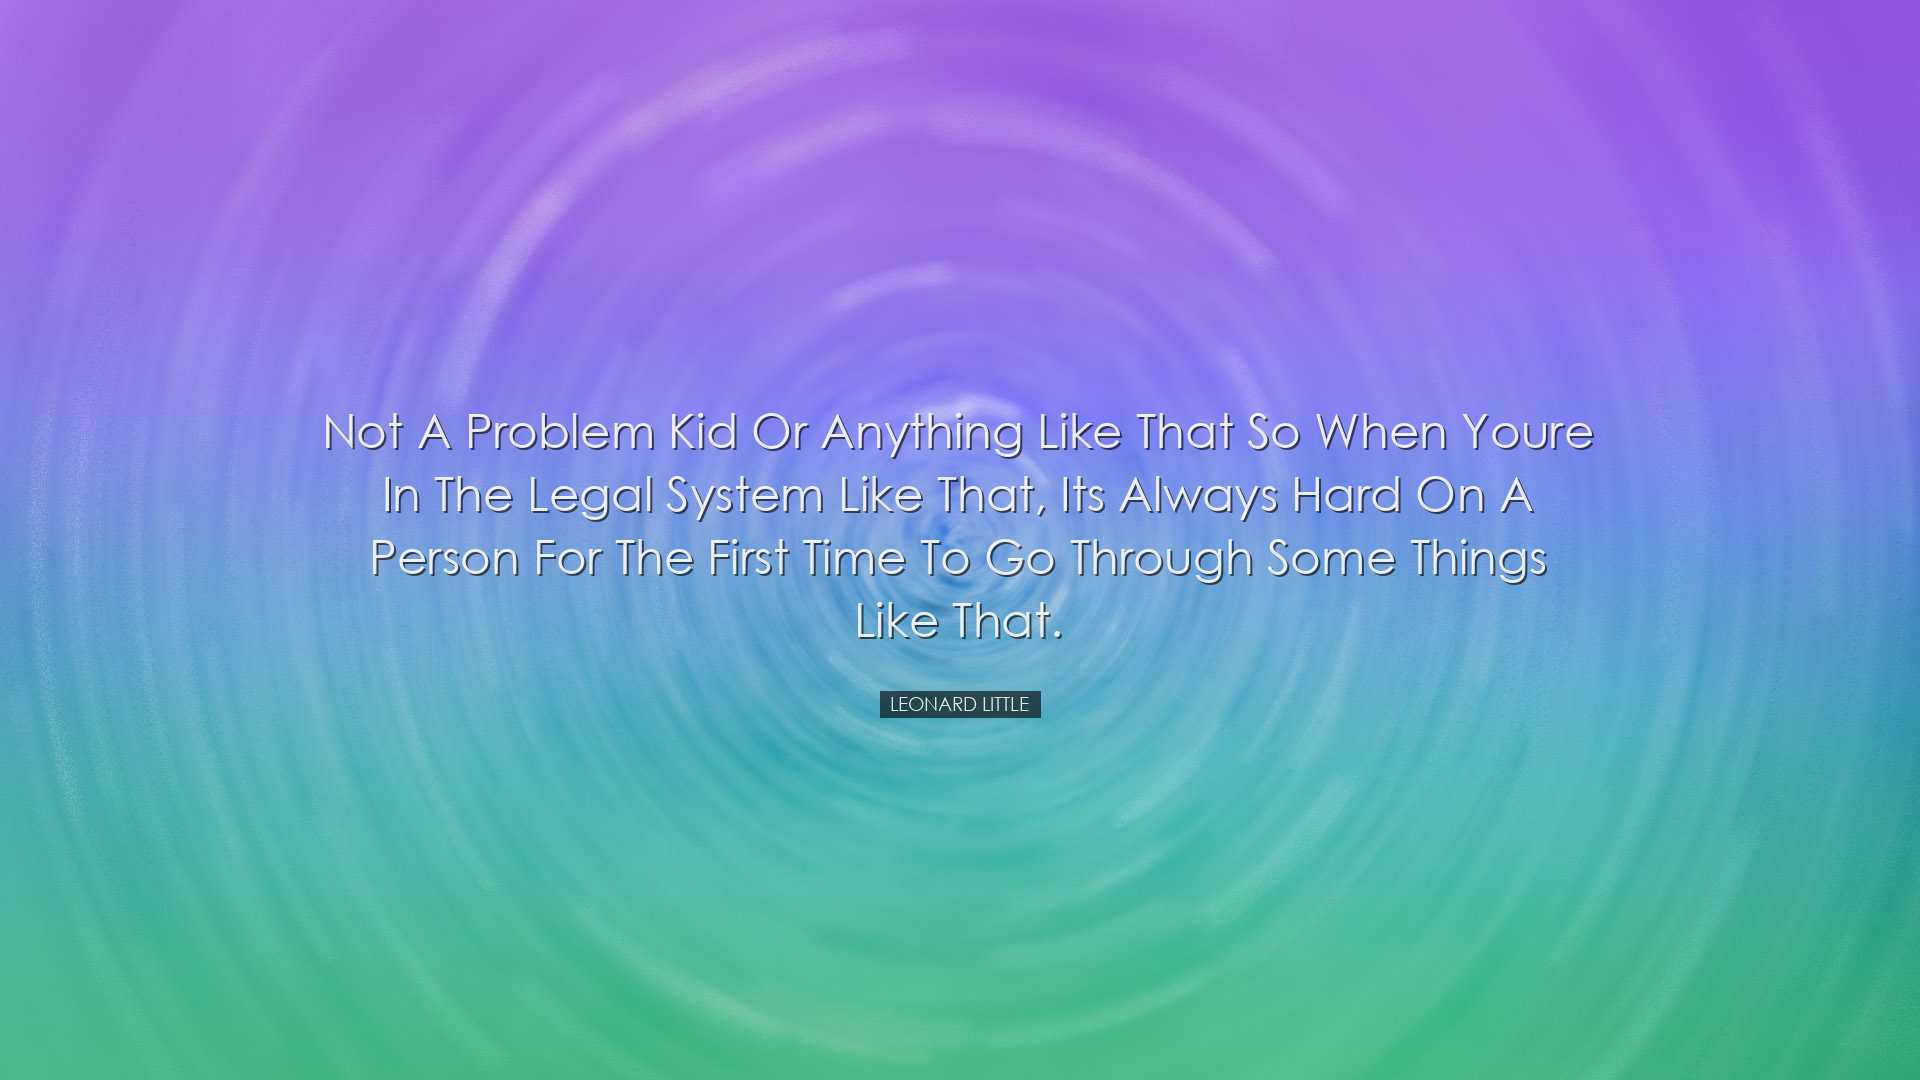 Not a problem kid or anything like that so when youre in the legal